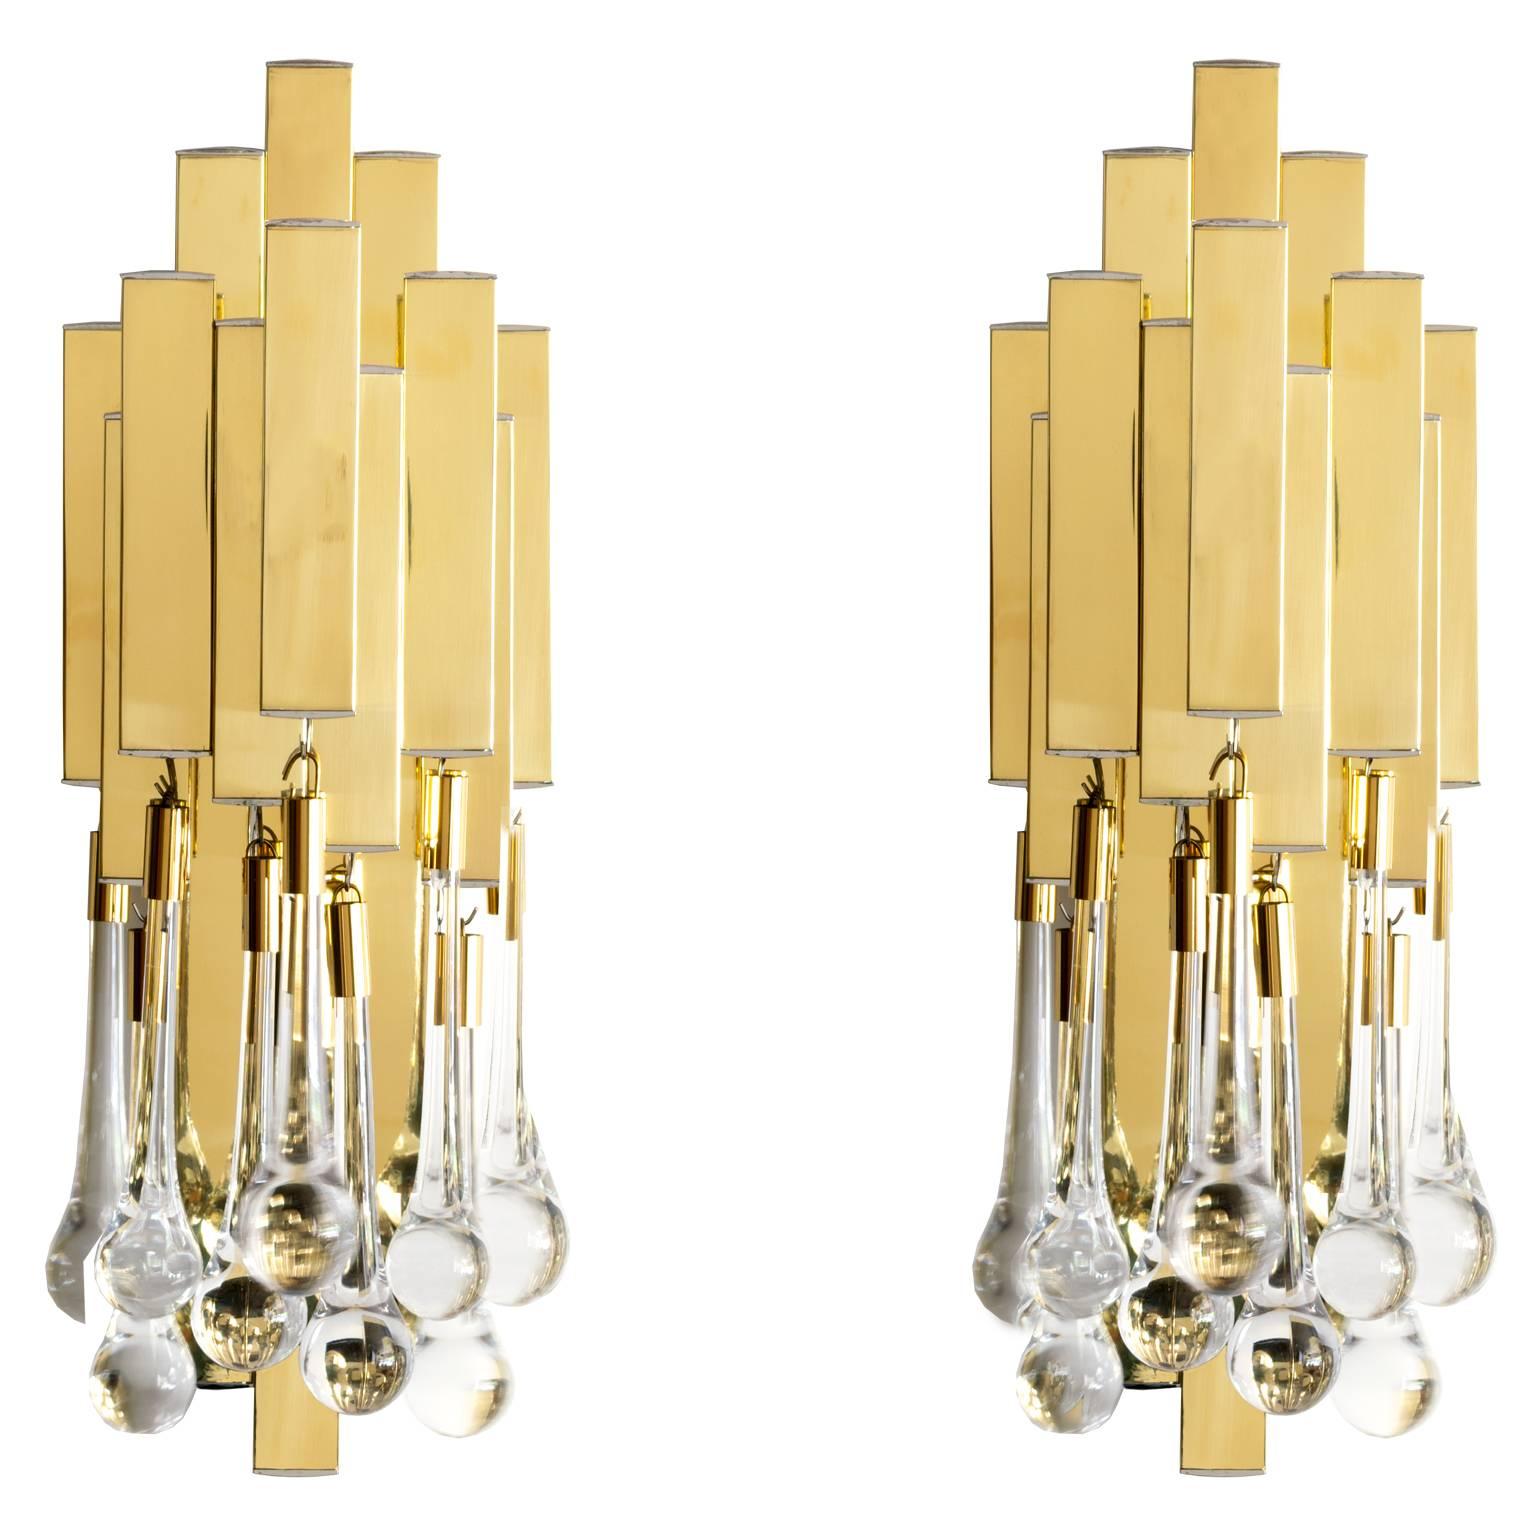 Pair of Mid-Century Modern Brass and Crystal Sconces by Lumica, Barcelona Spain